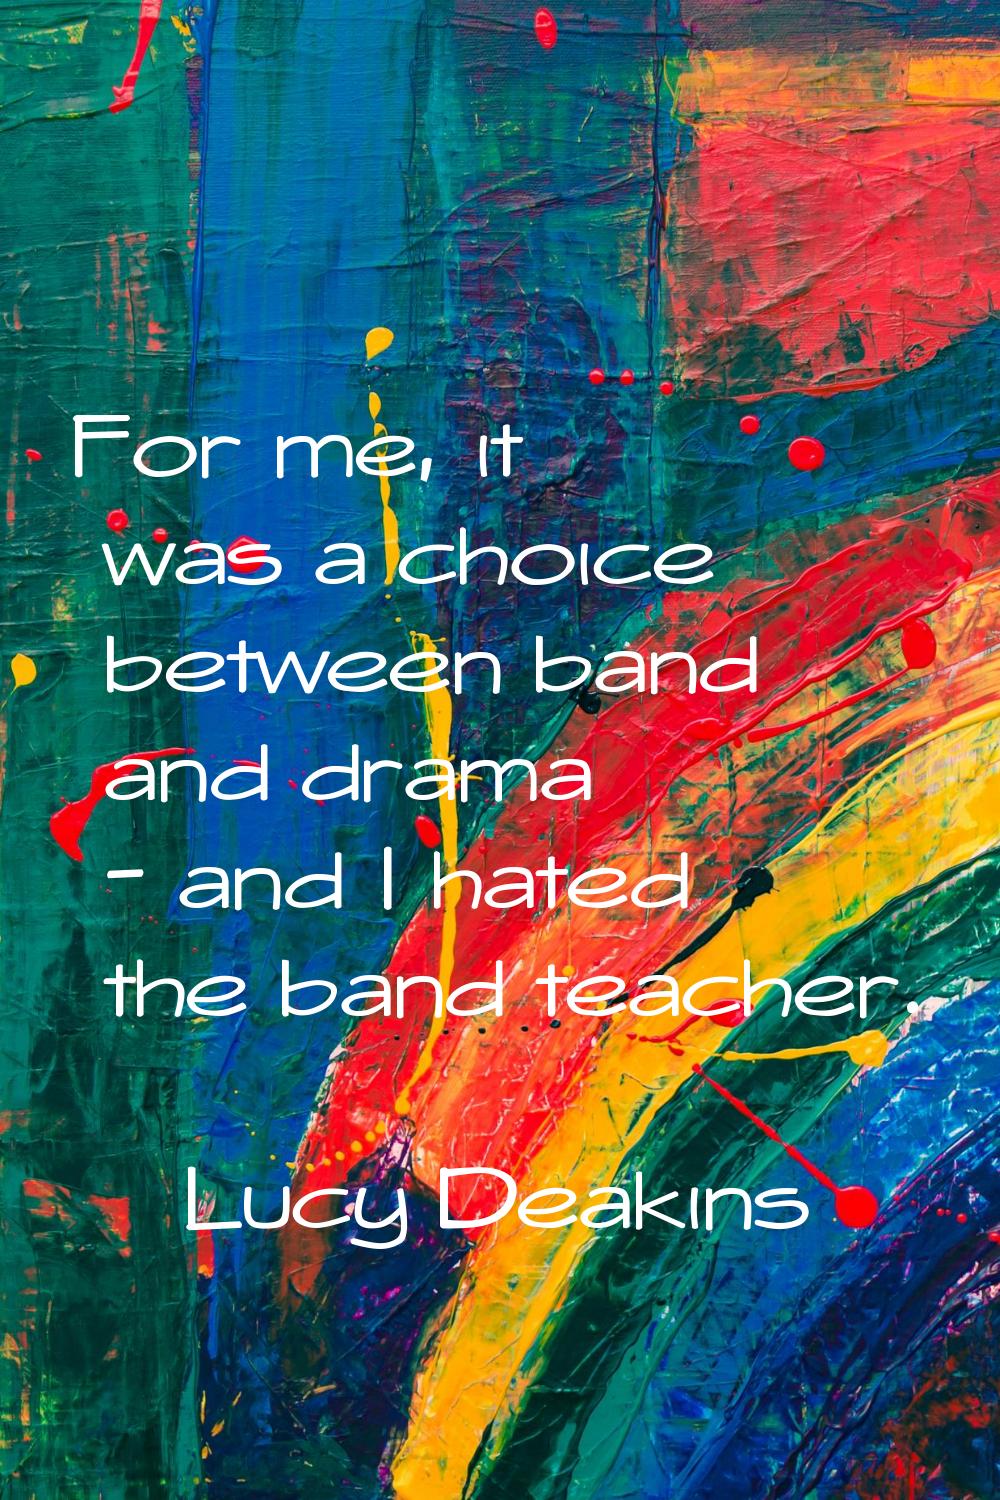 For me, it was a choice between band and drama - and I hated the band teacher.